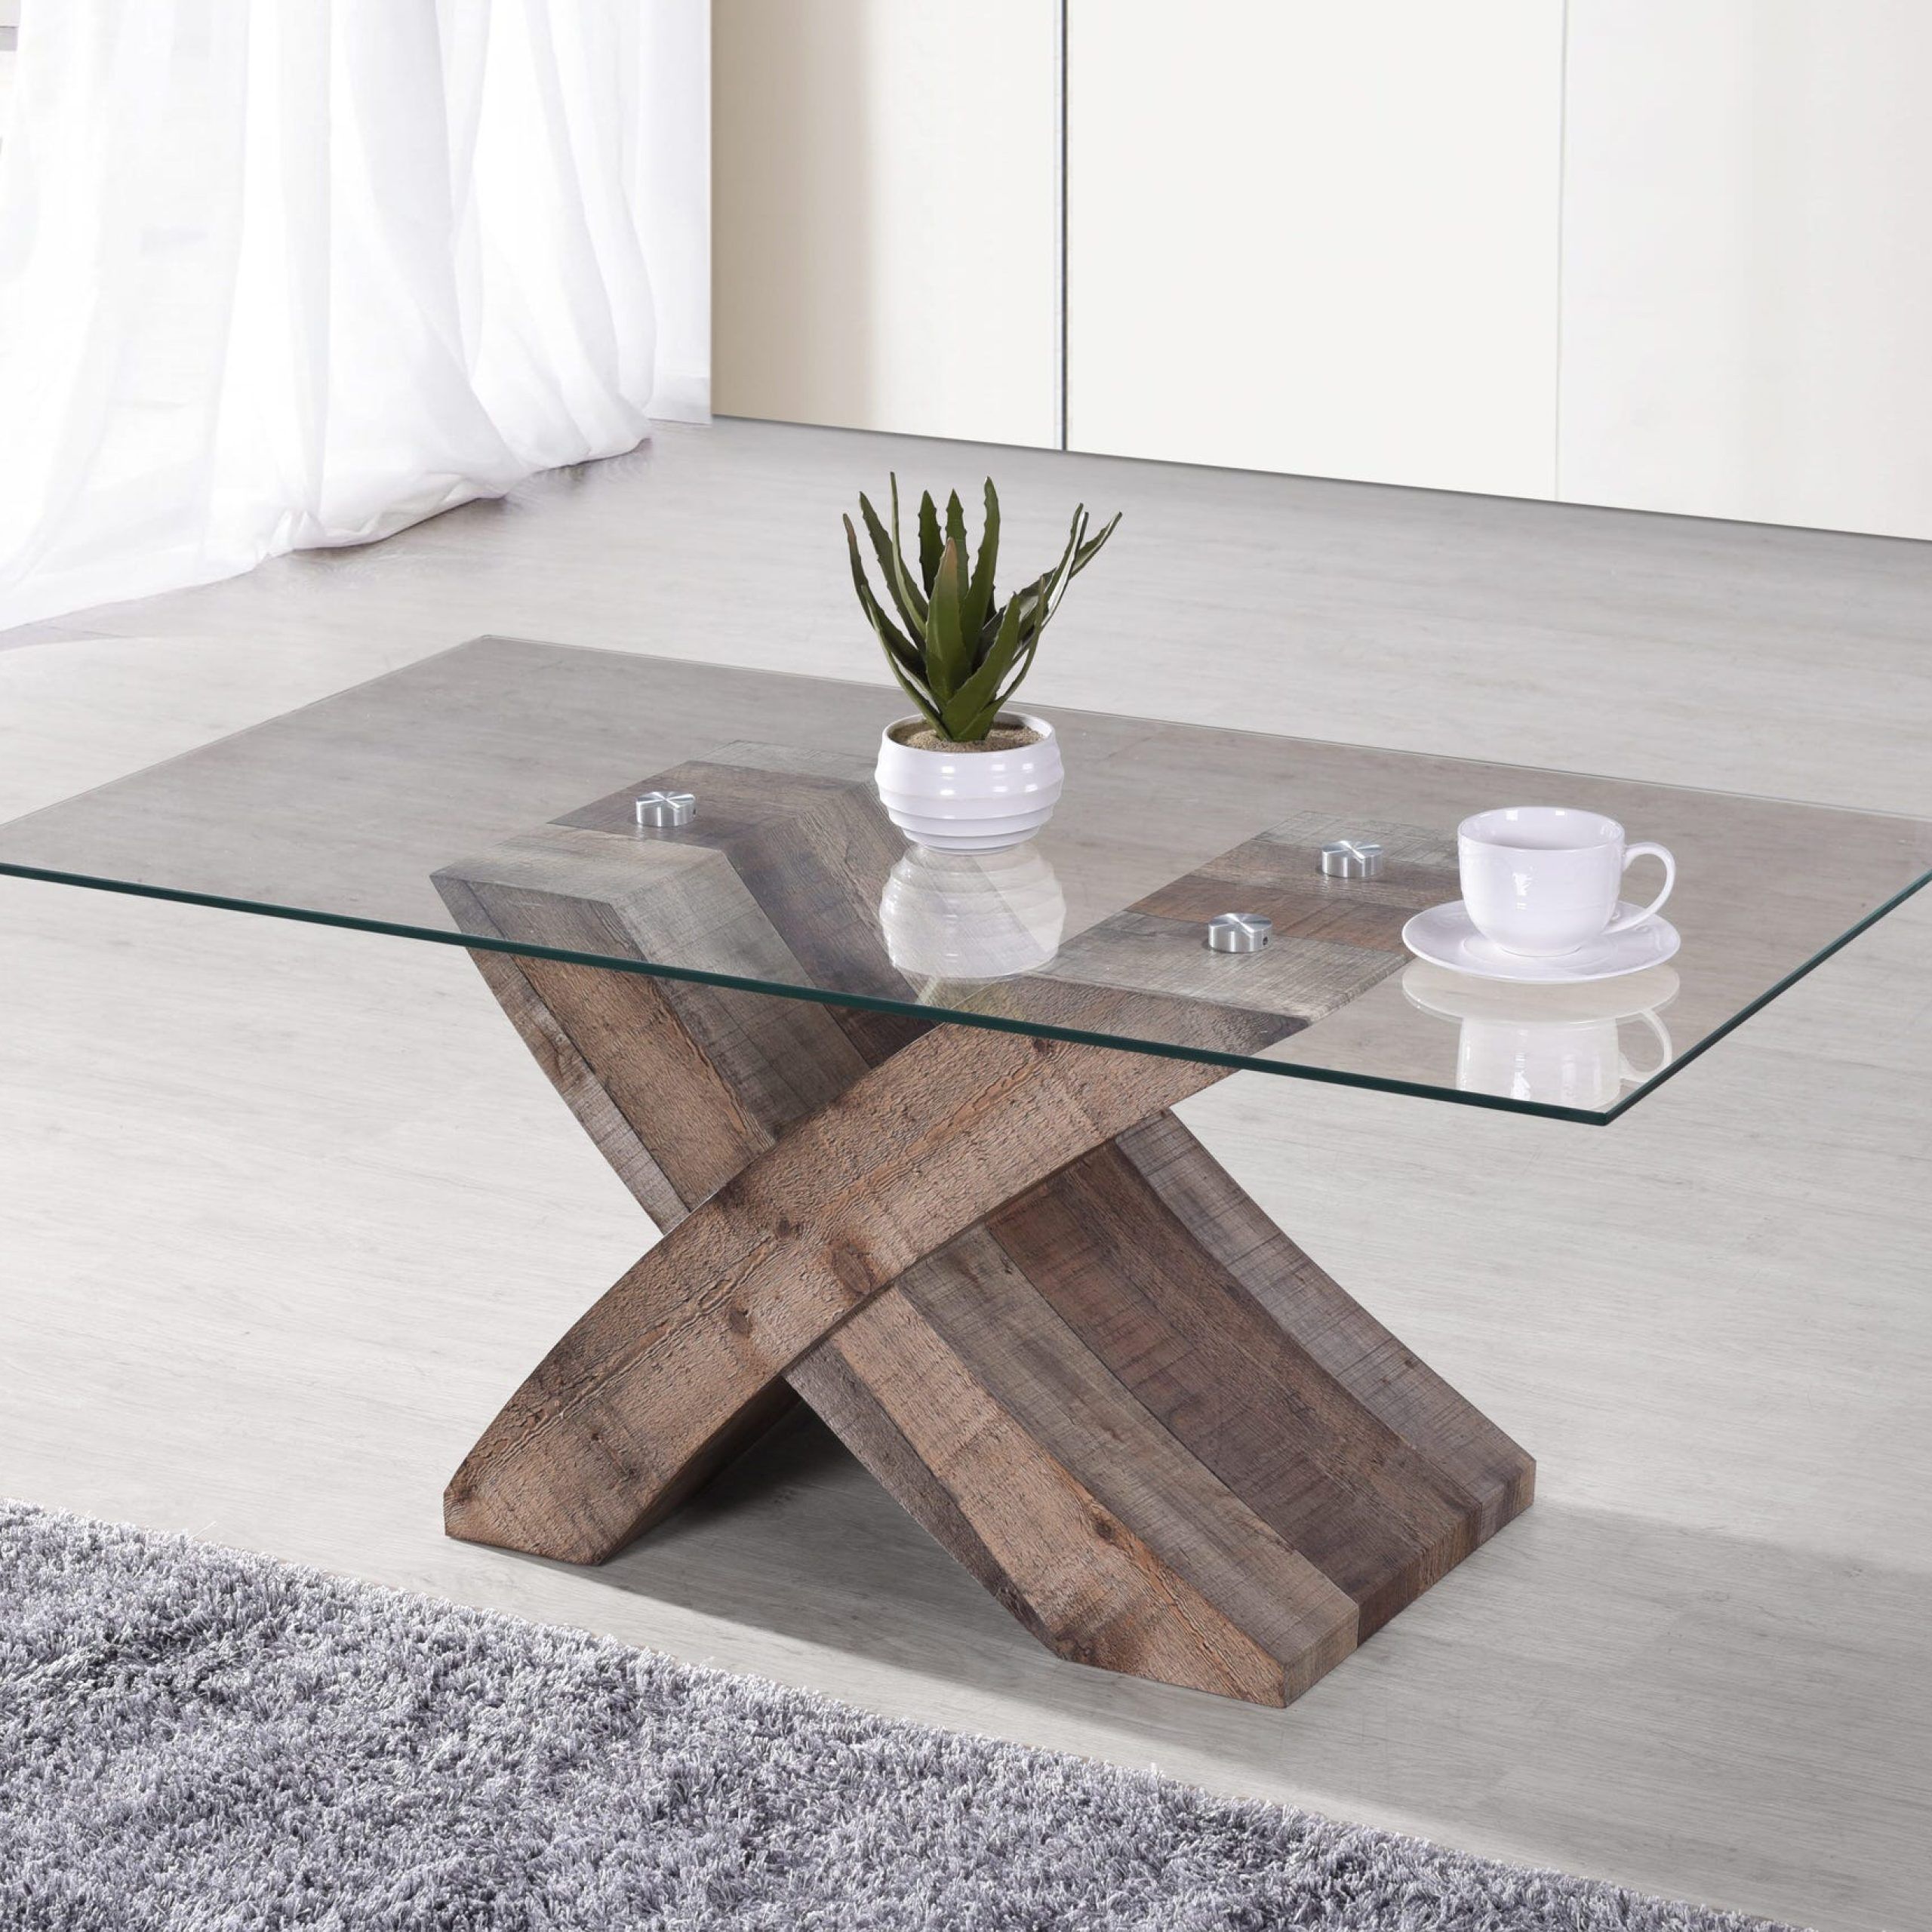 Rustic Wood And Glass Coffee Table – A Rustic Coffee Table Provides The Throughout Wood Tempered Glass Top Coffee Tables (View 15 of 20)